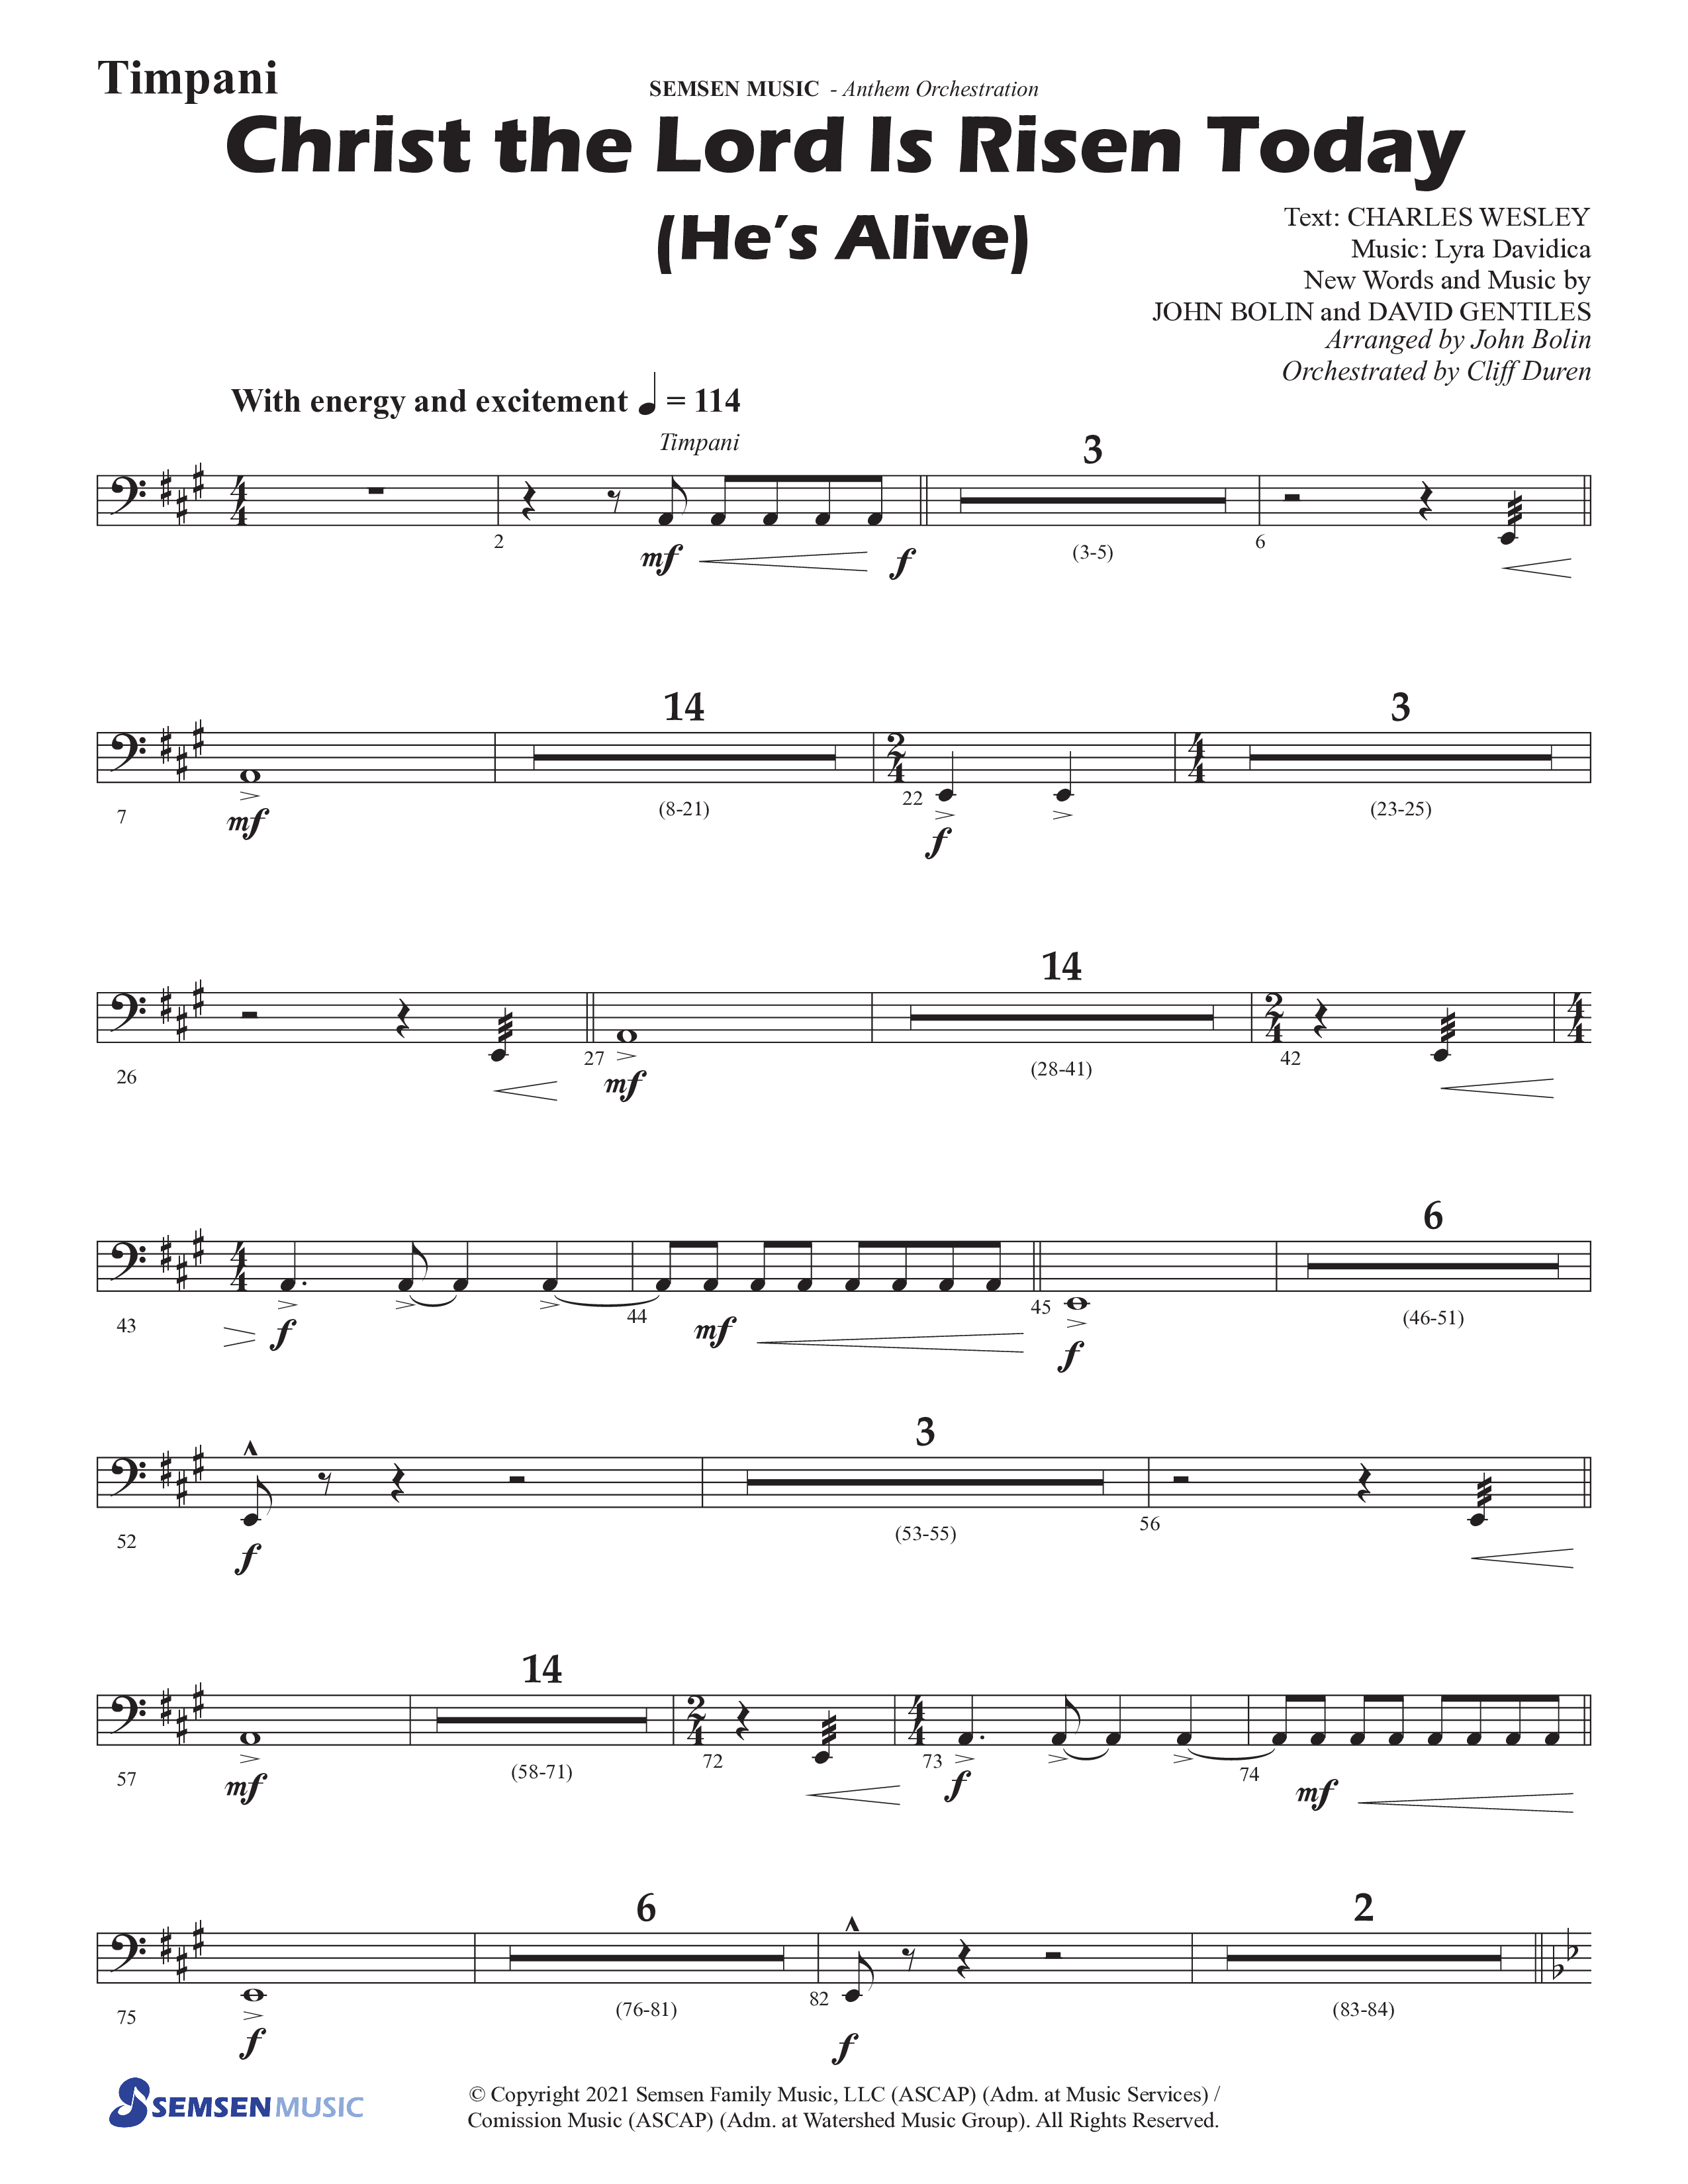 Christ The Lord Is Risen Today (He's Alive) (Choral Anthem SATB) Timpani (Semsen Music / Arr. John Bolin / Orch. Cliff Duren)